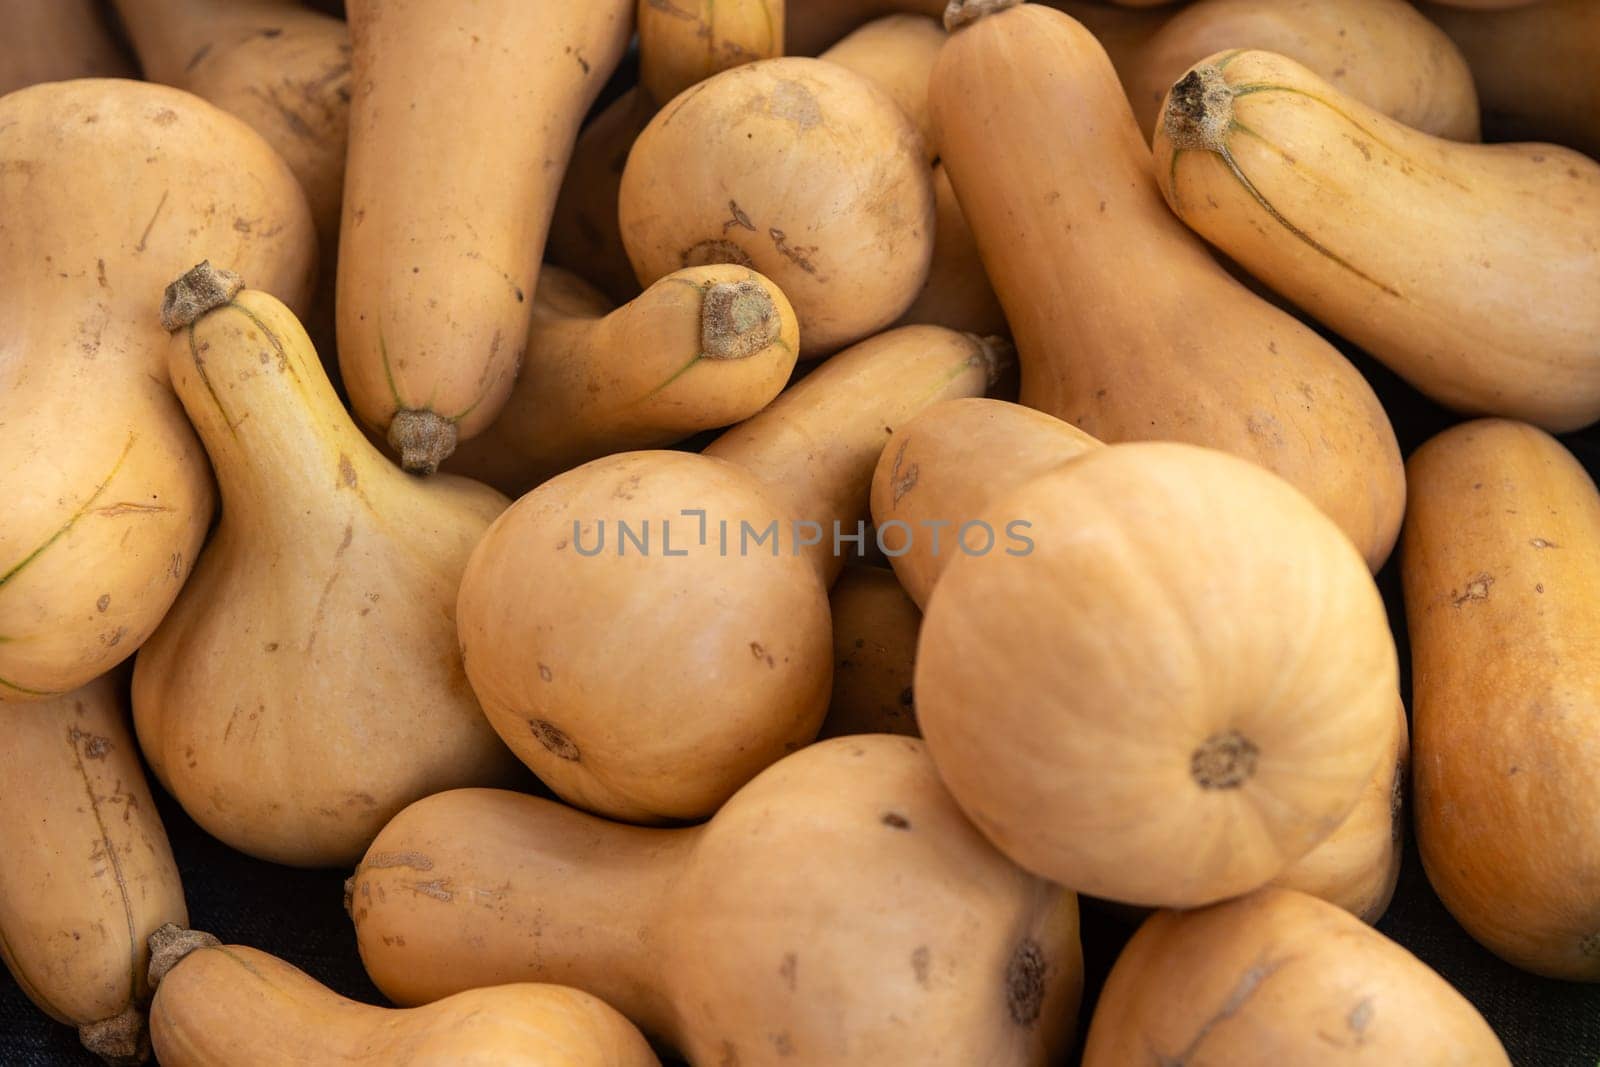 Background of Butternut Sqush at the market